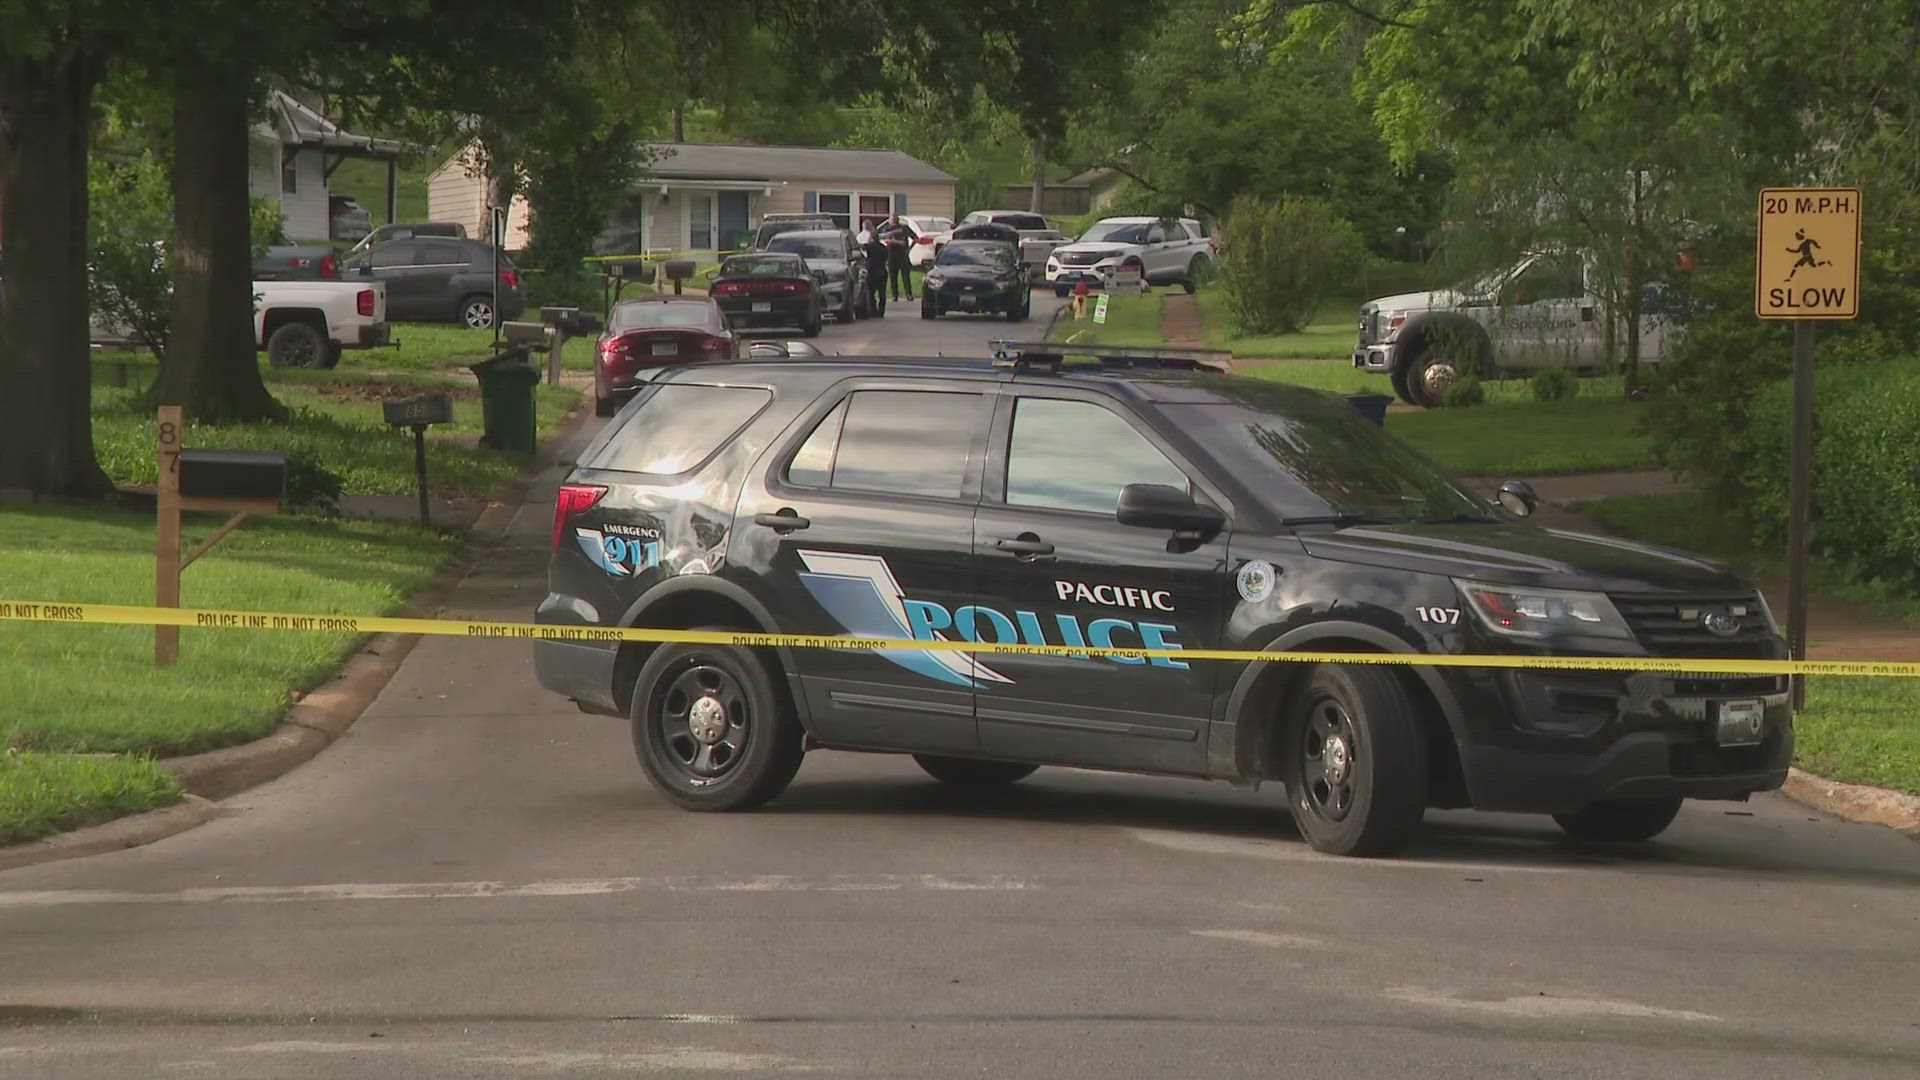 A man and woman were found shot to death Monday afternoon inside a home in Pacific. An incident police are now investigating as a murder-suicide.